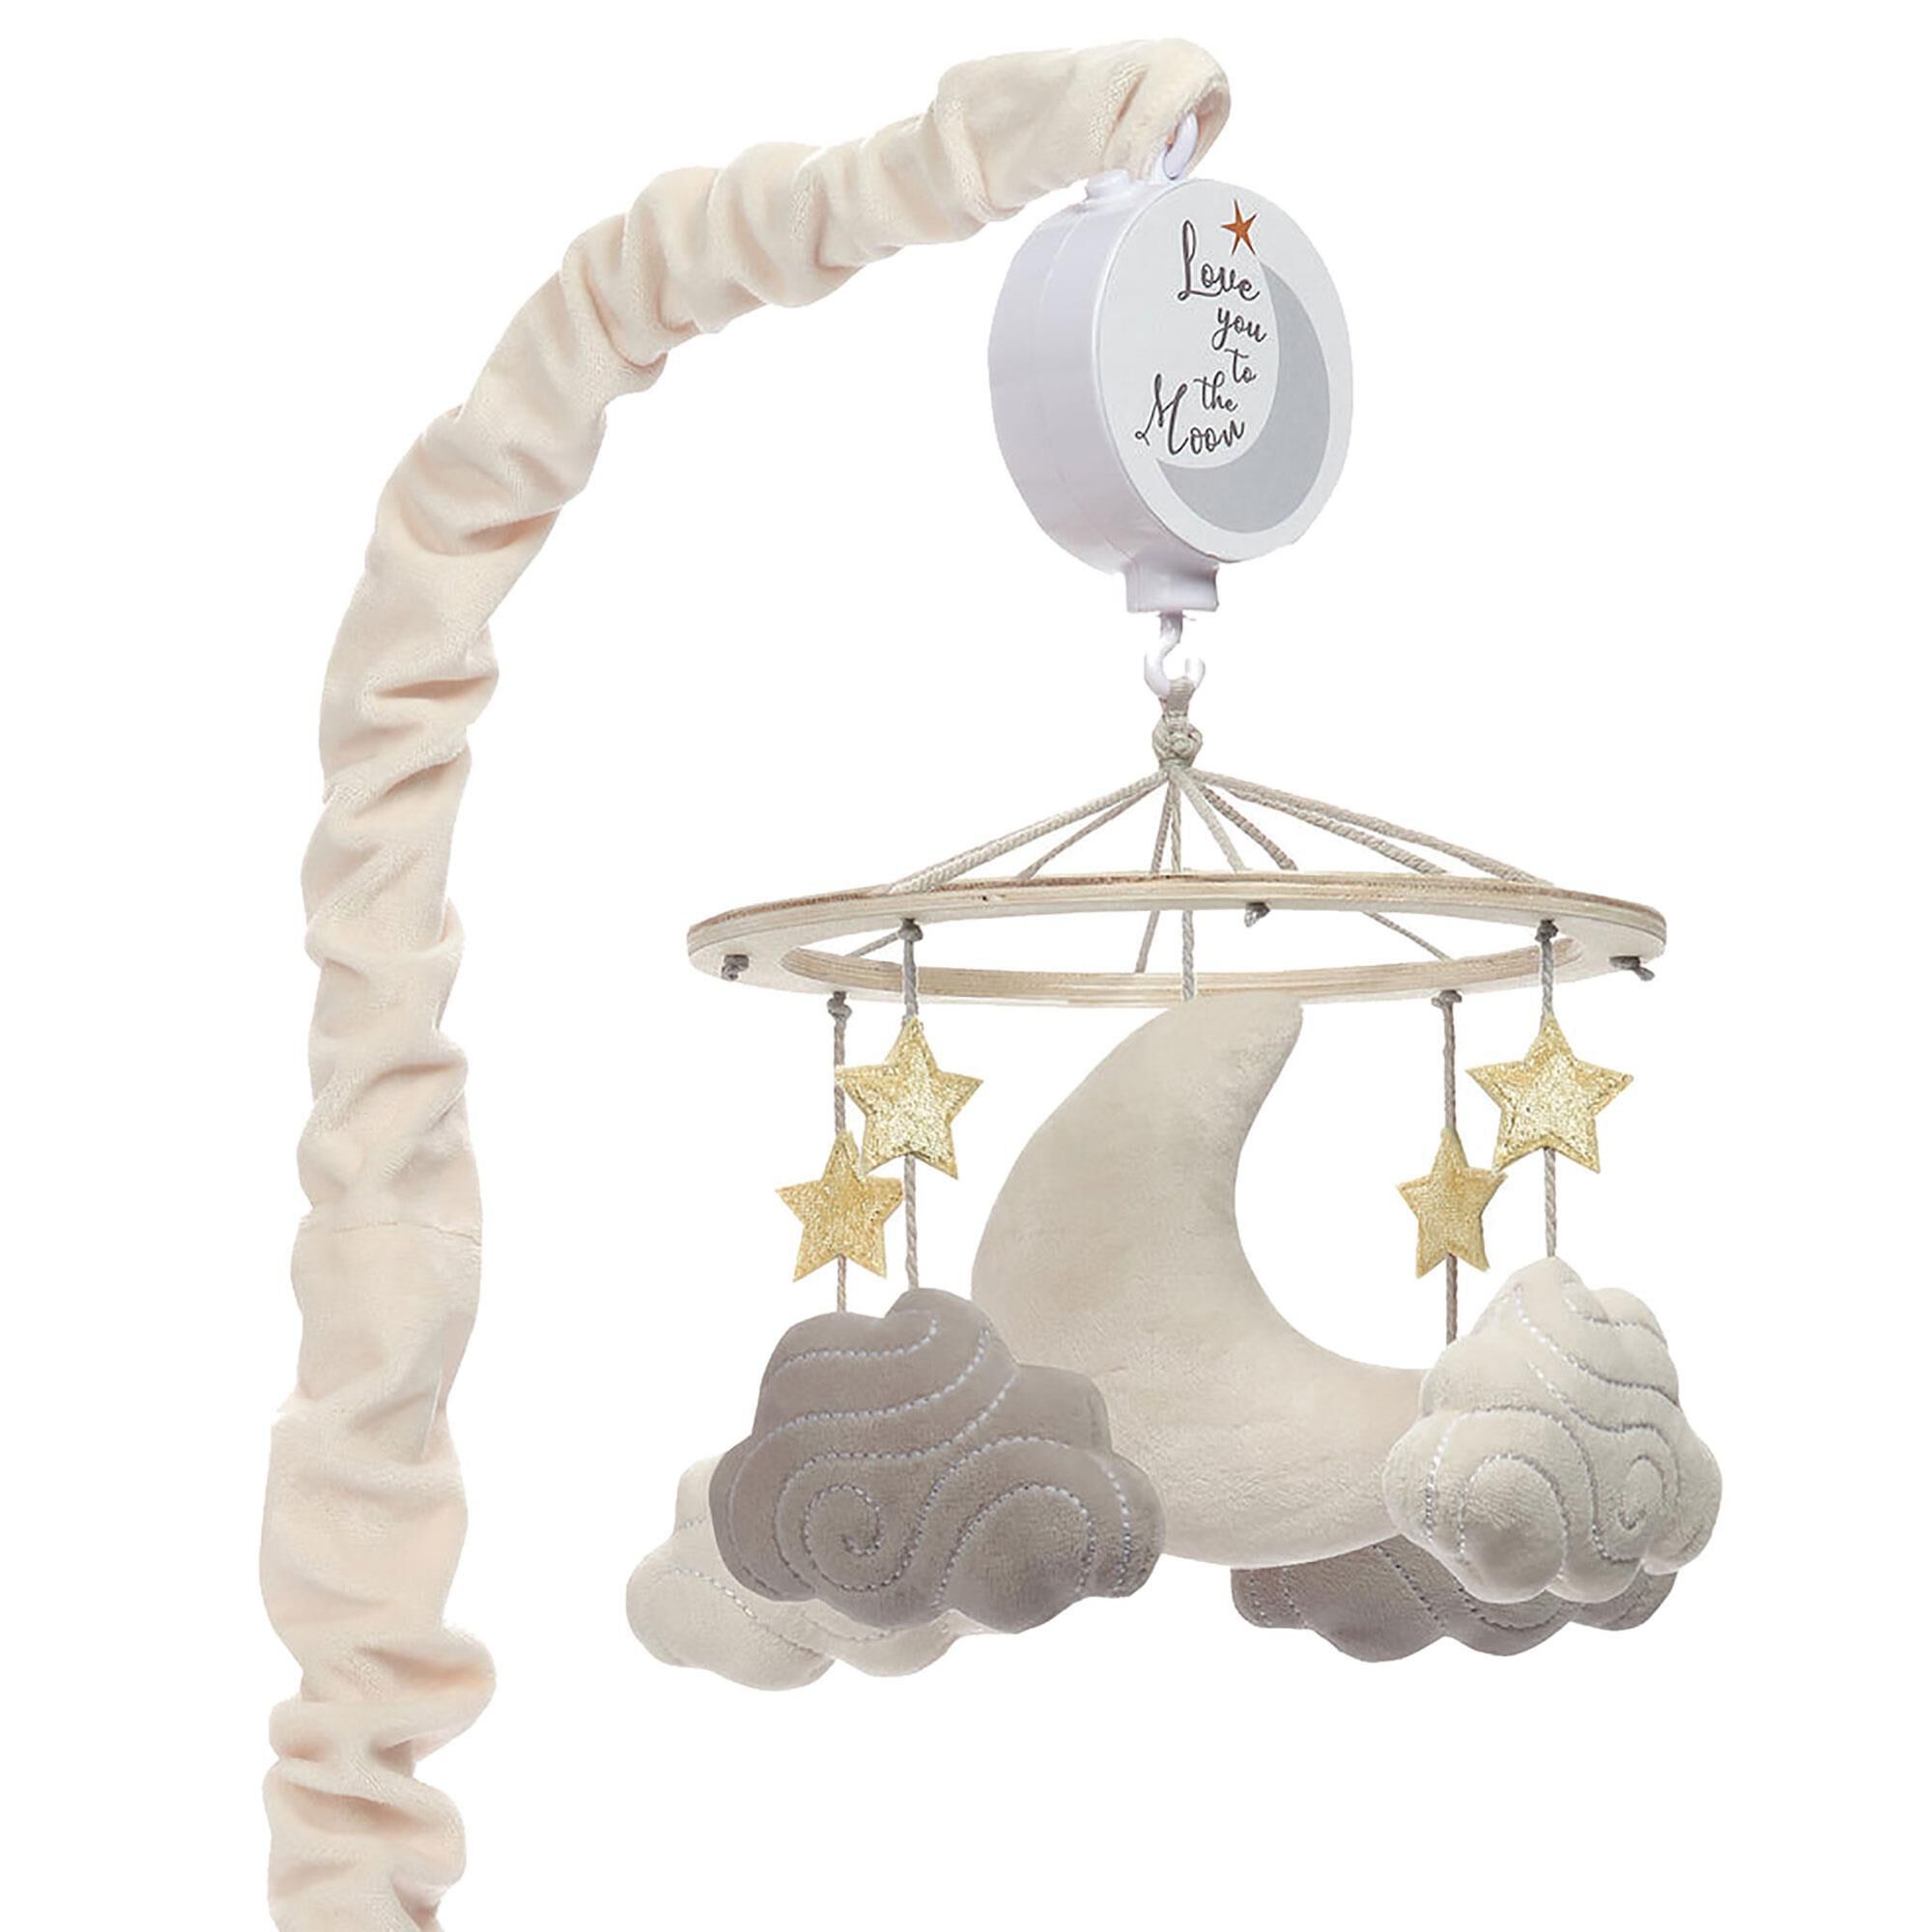 Lambs and Ivy Goodnight Moon Musical Baby Crib Mobile Soother Toy in White